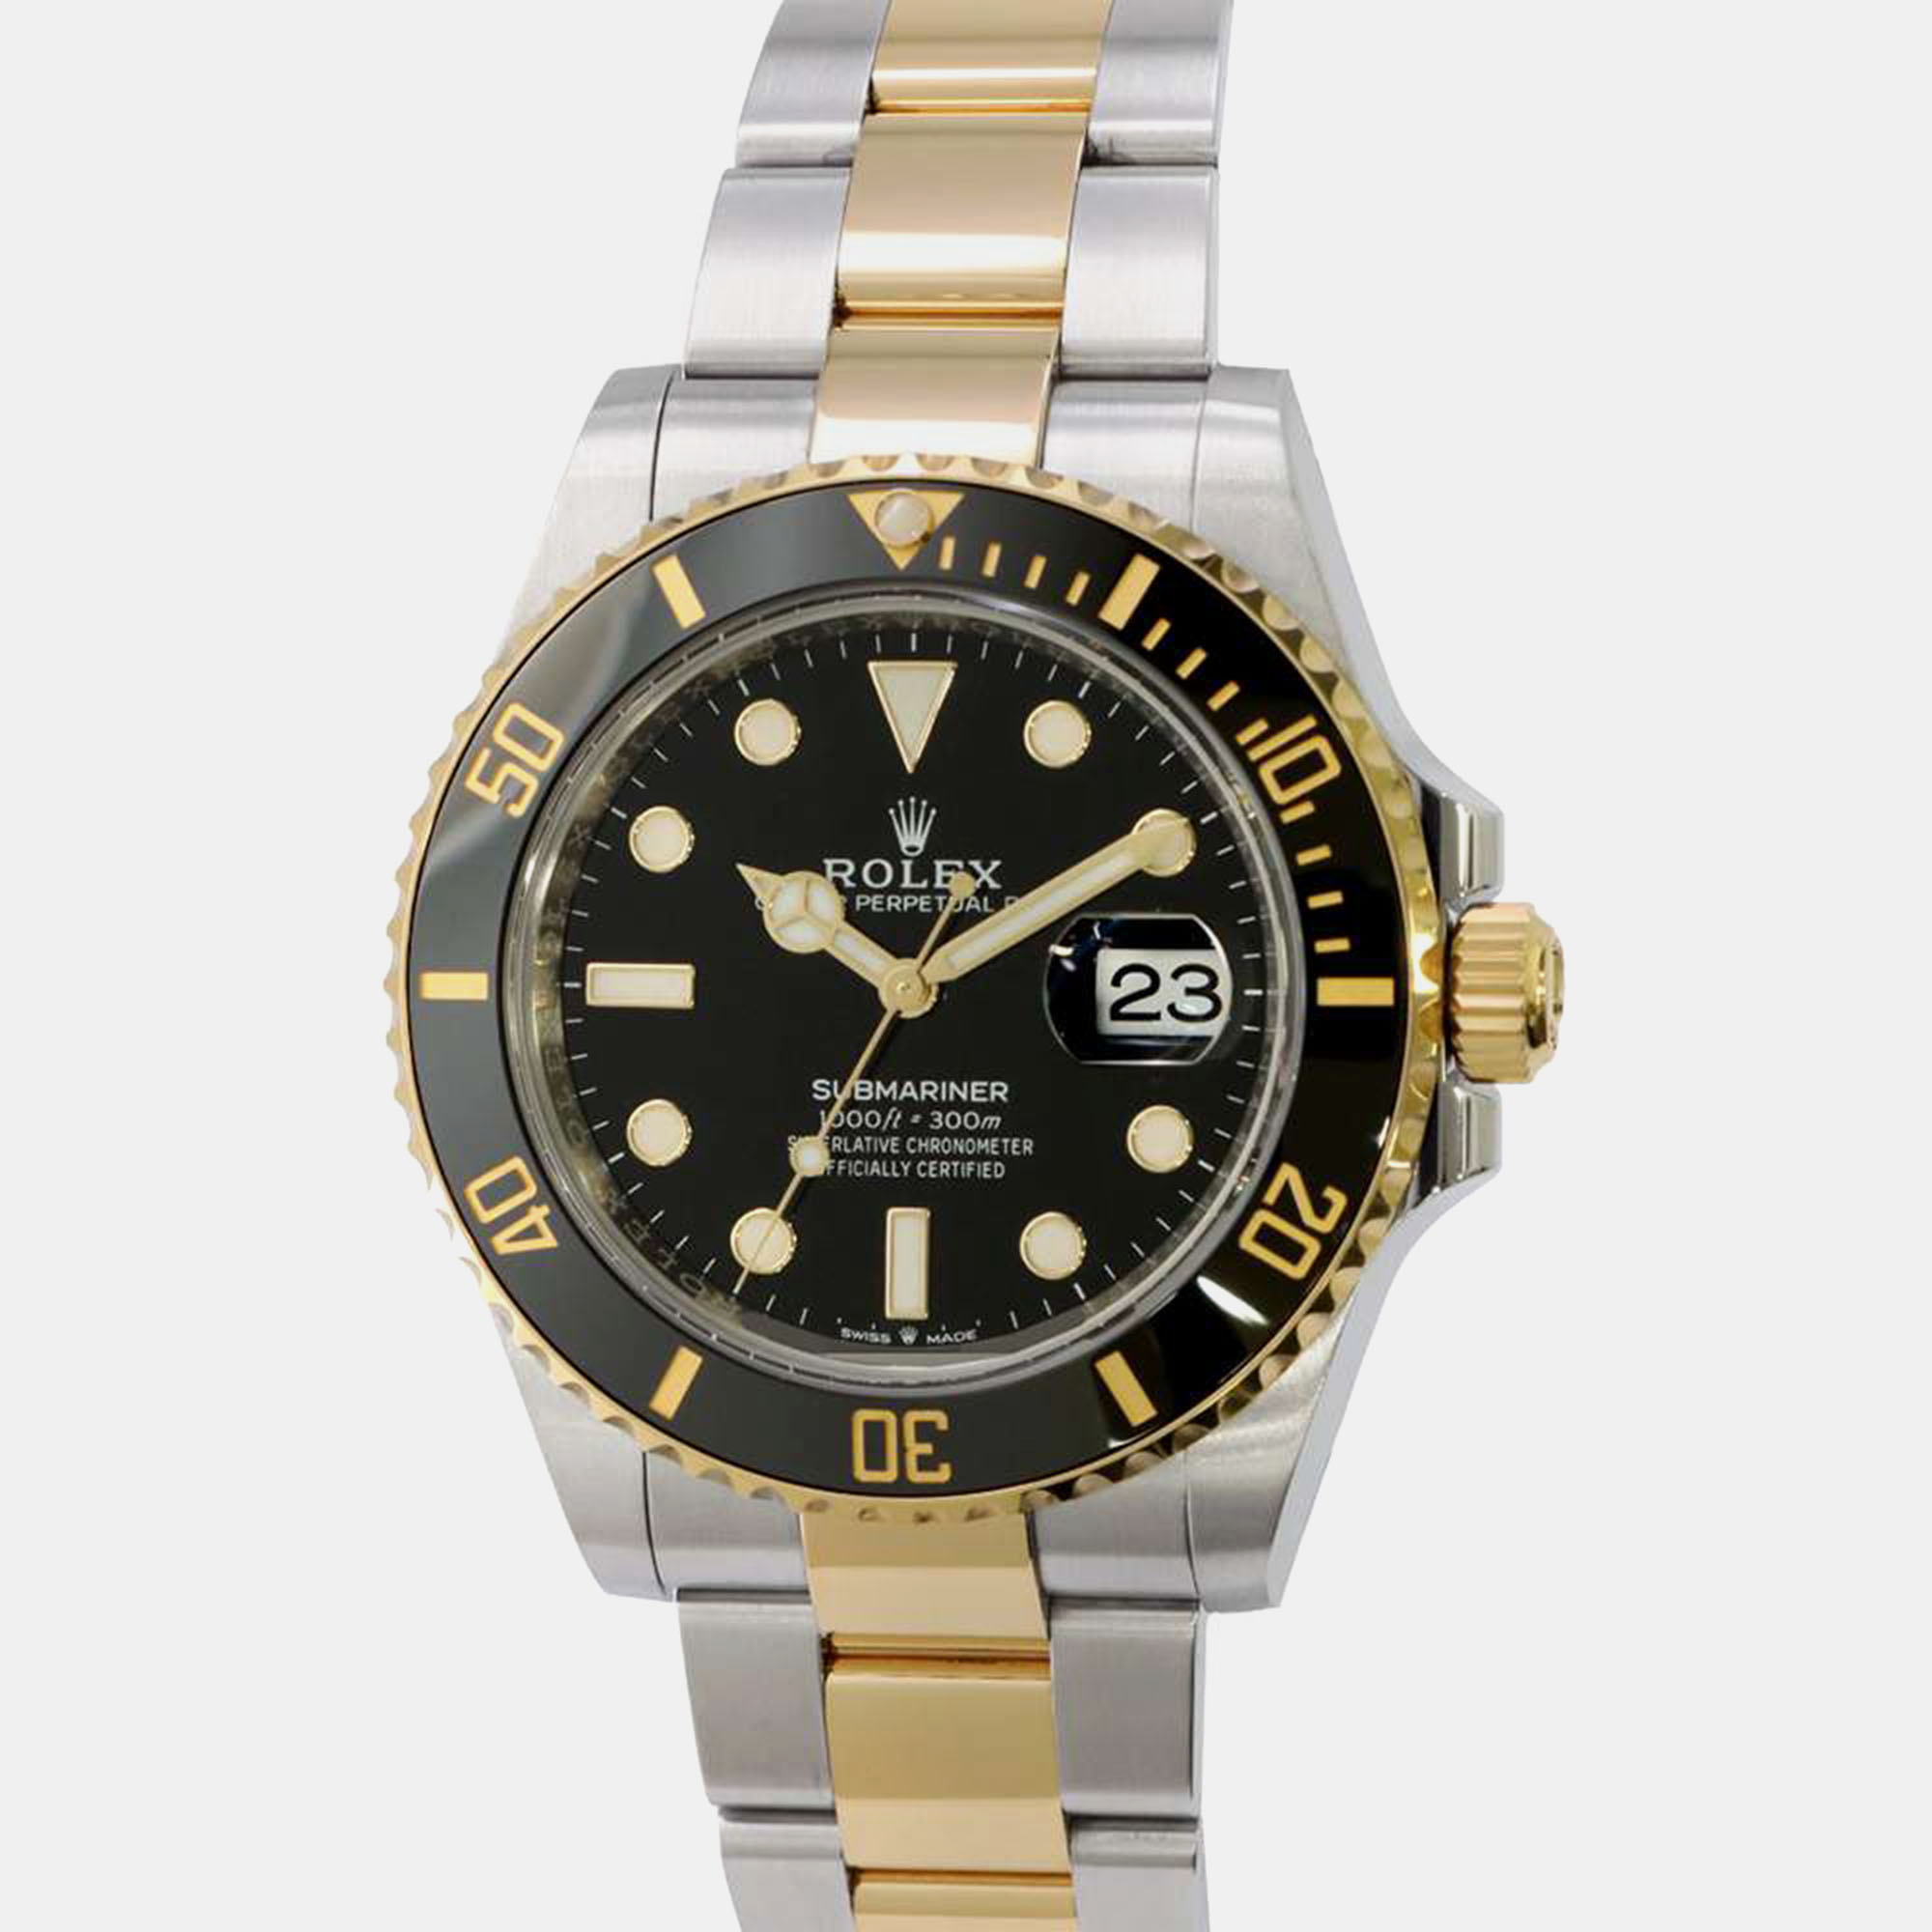 Rolex black 18k yellow gold stainless steel submariner 126613ln automatic men's wristwatch 41 mm